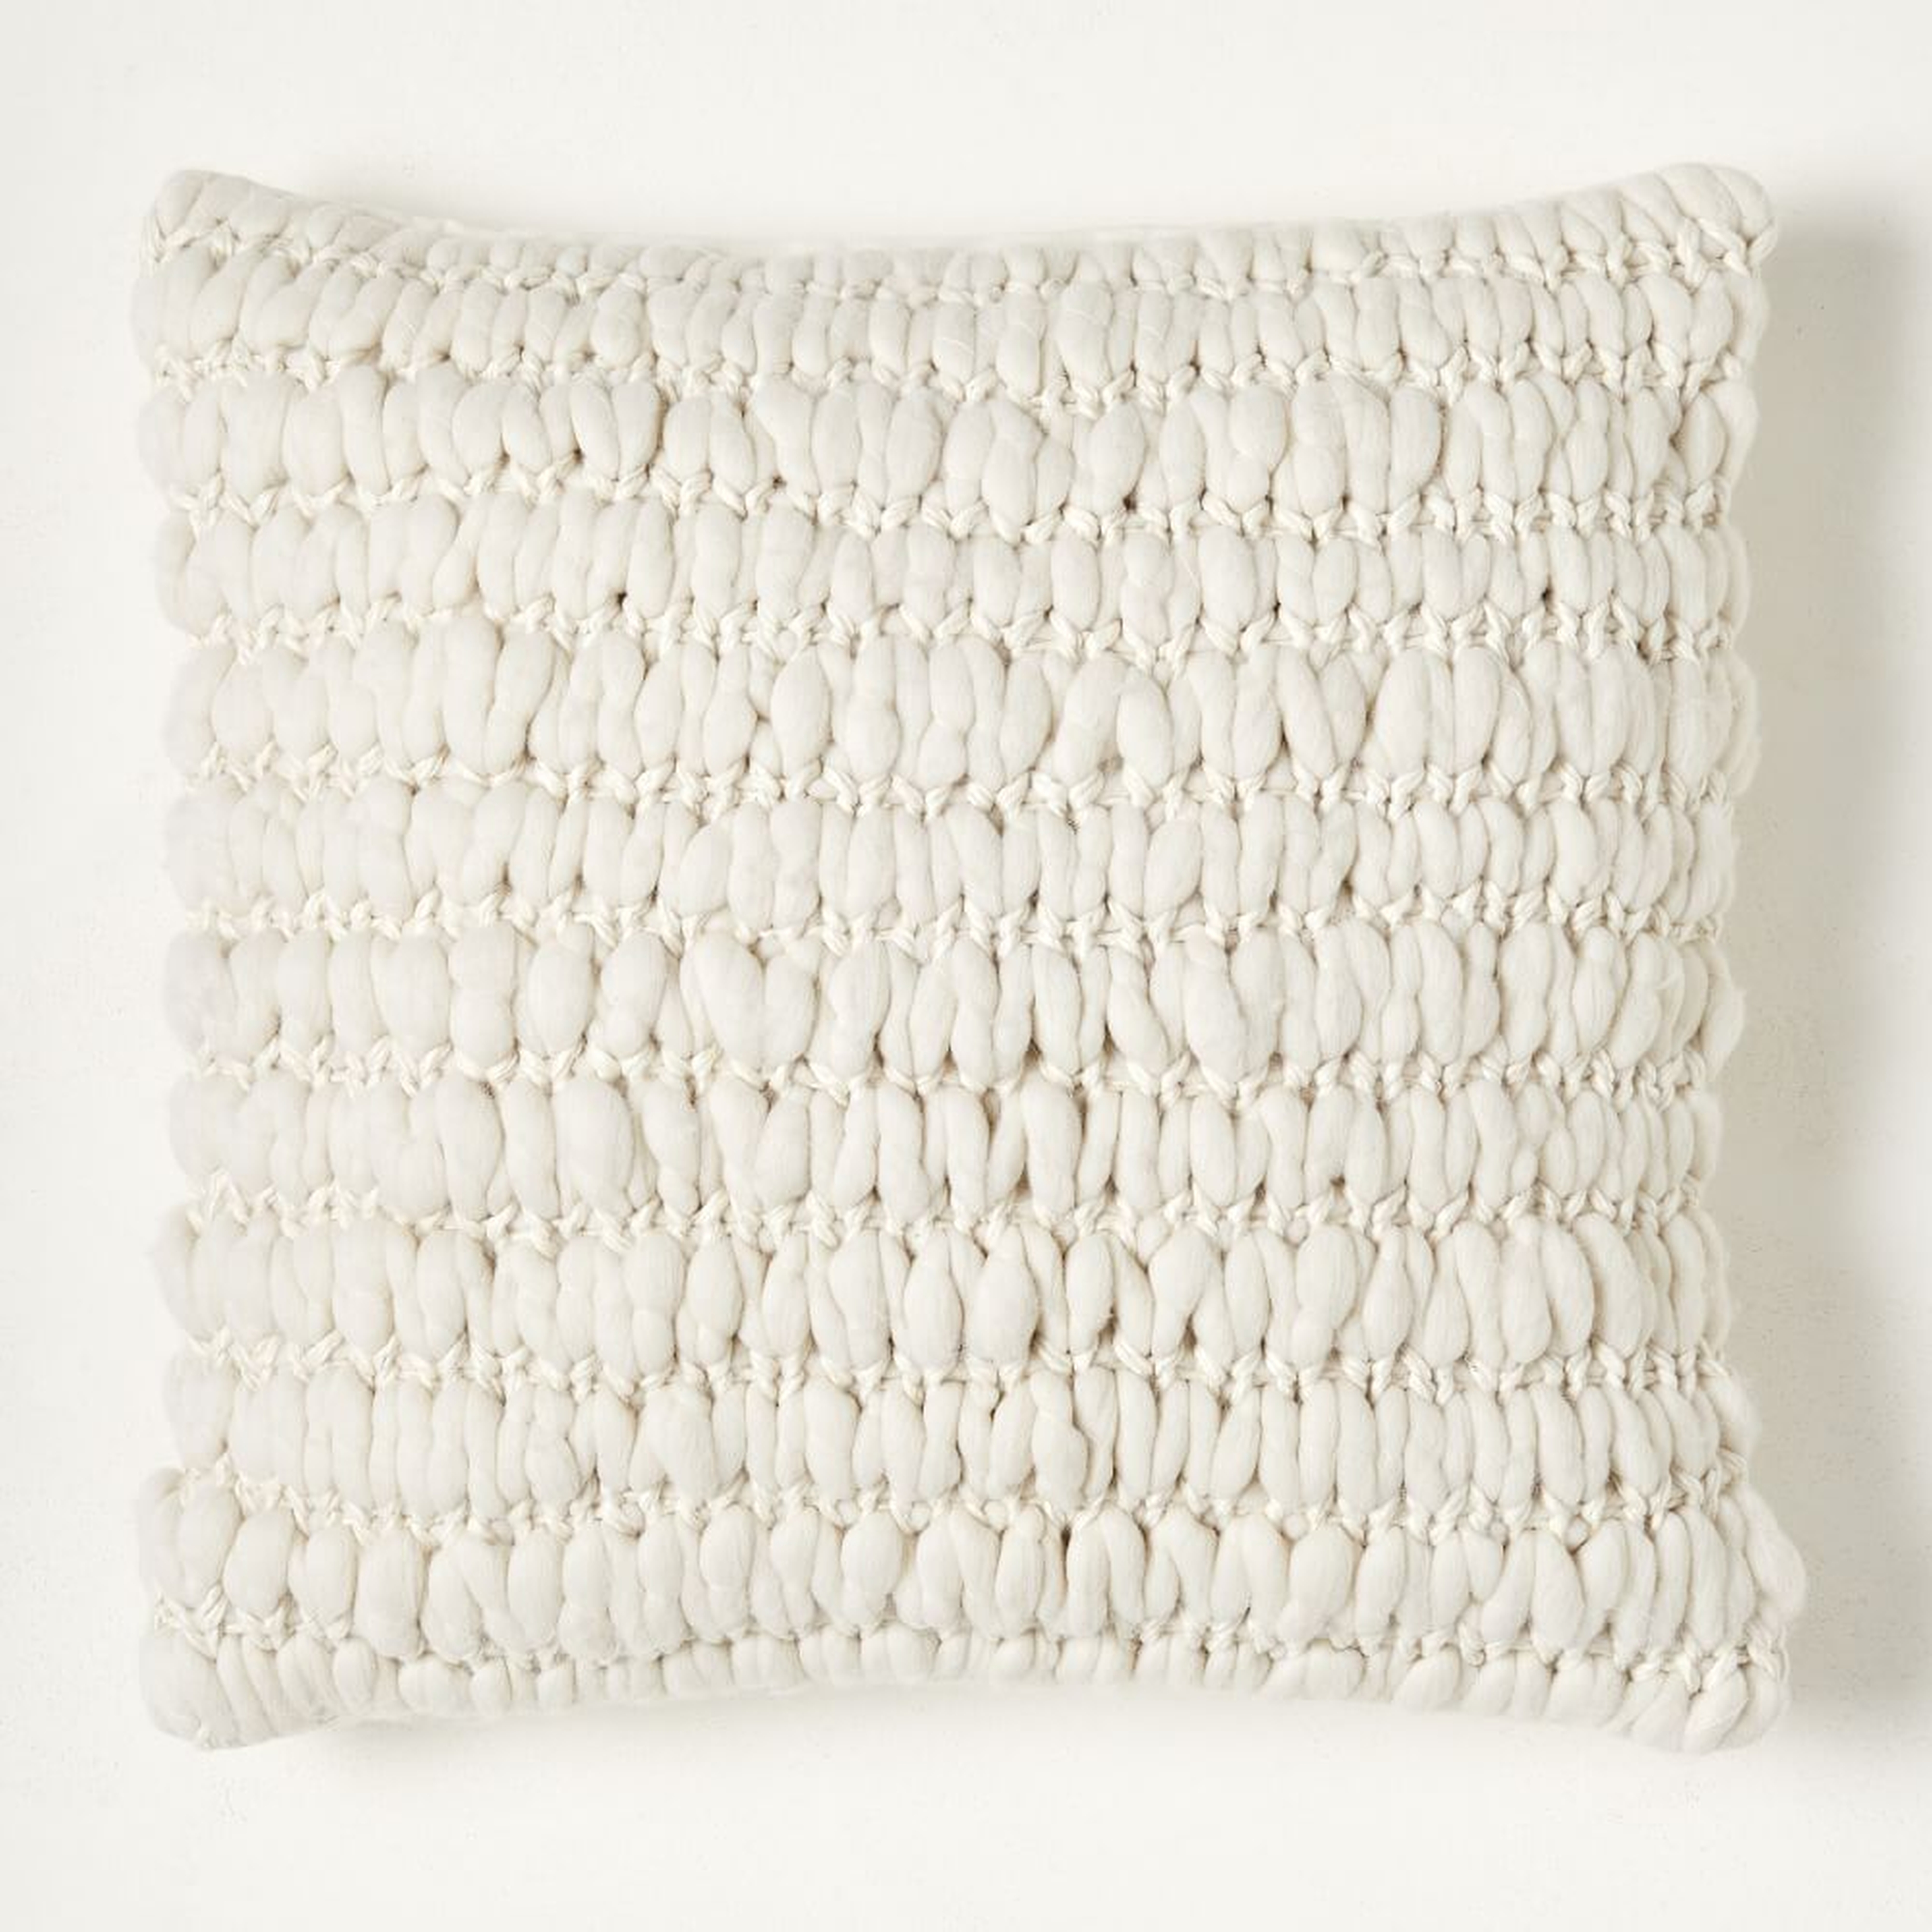 Chunky Knit Pillow Cover, 20"x20", White, Set of 2 - West Elm